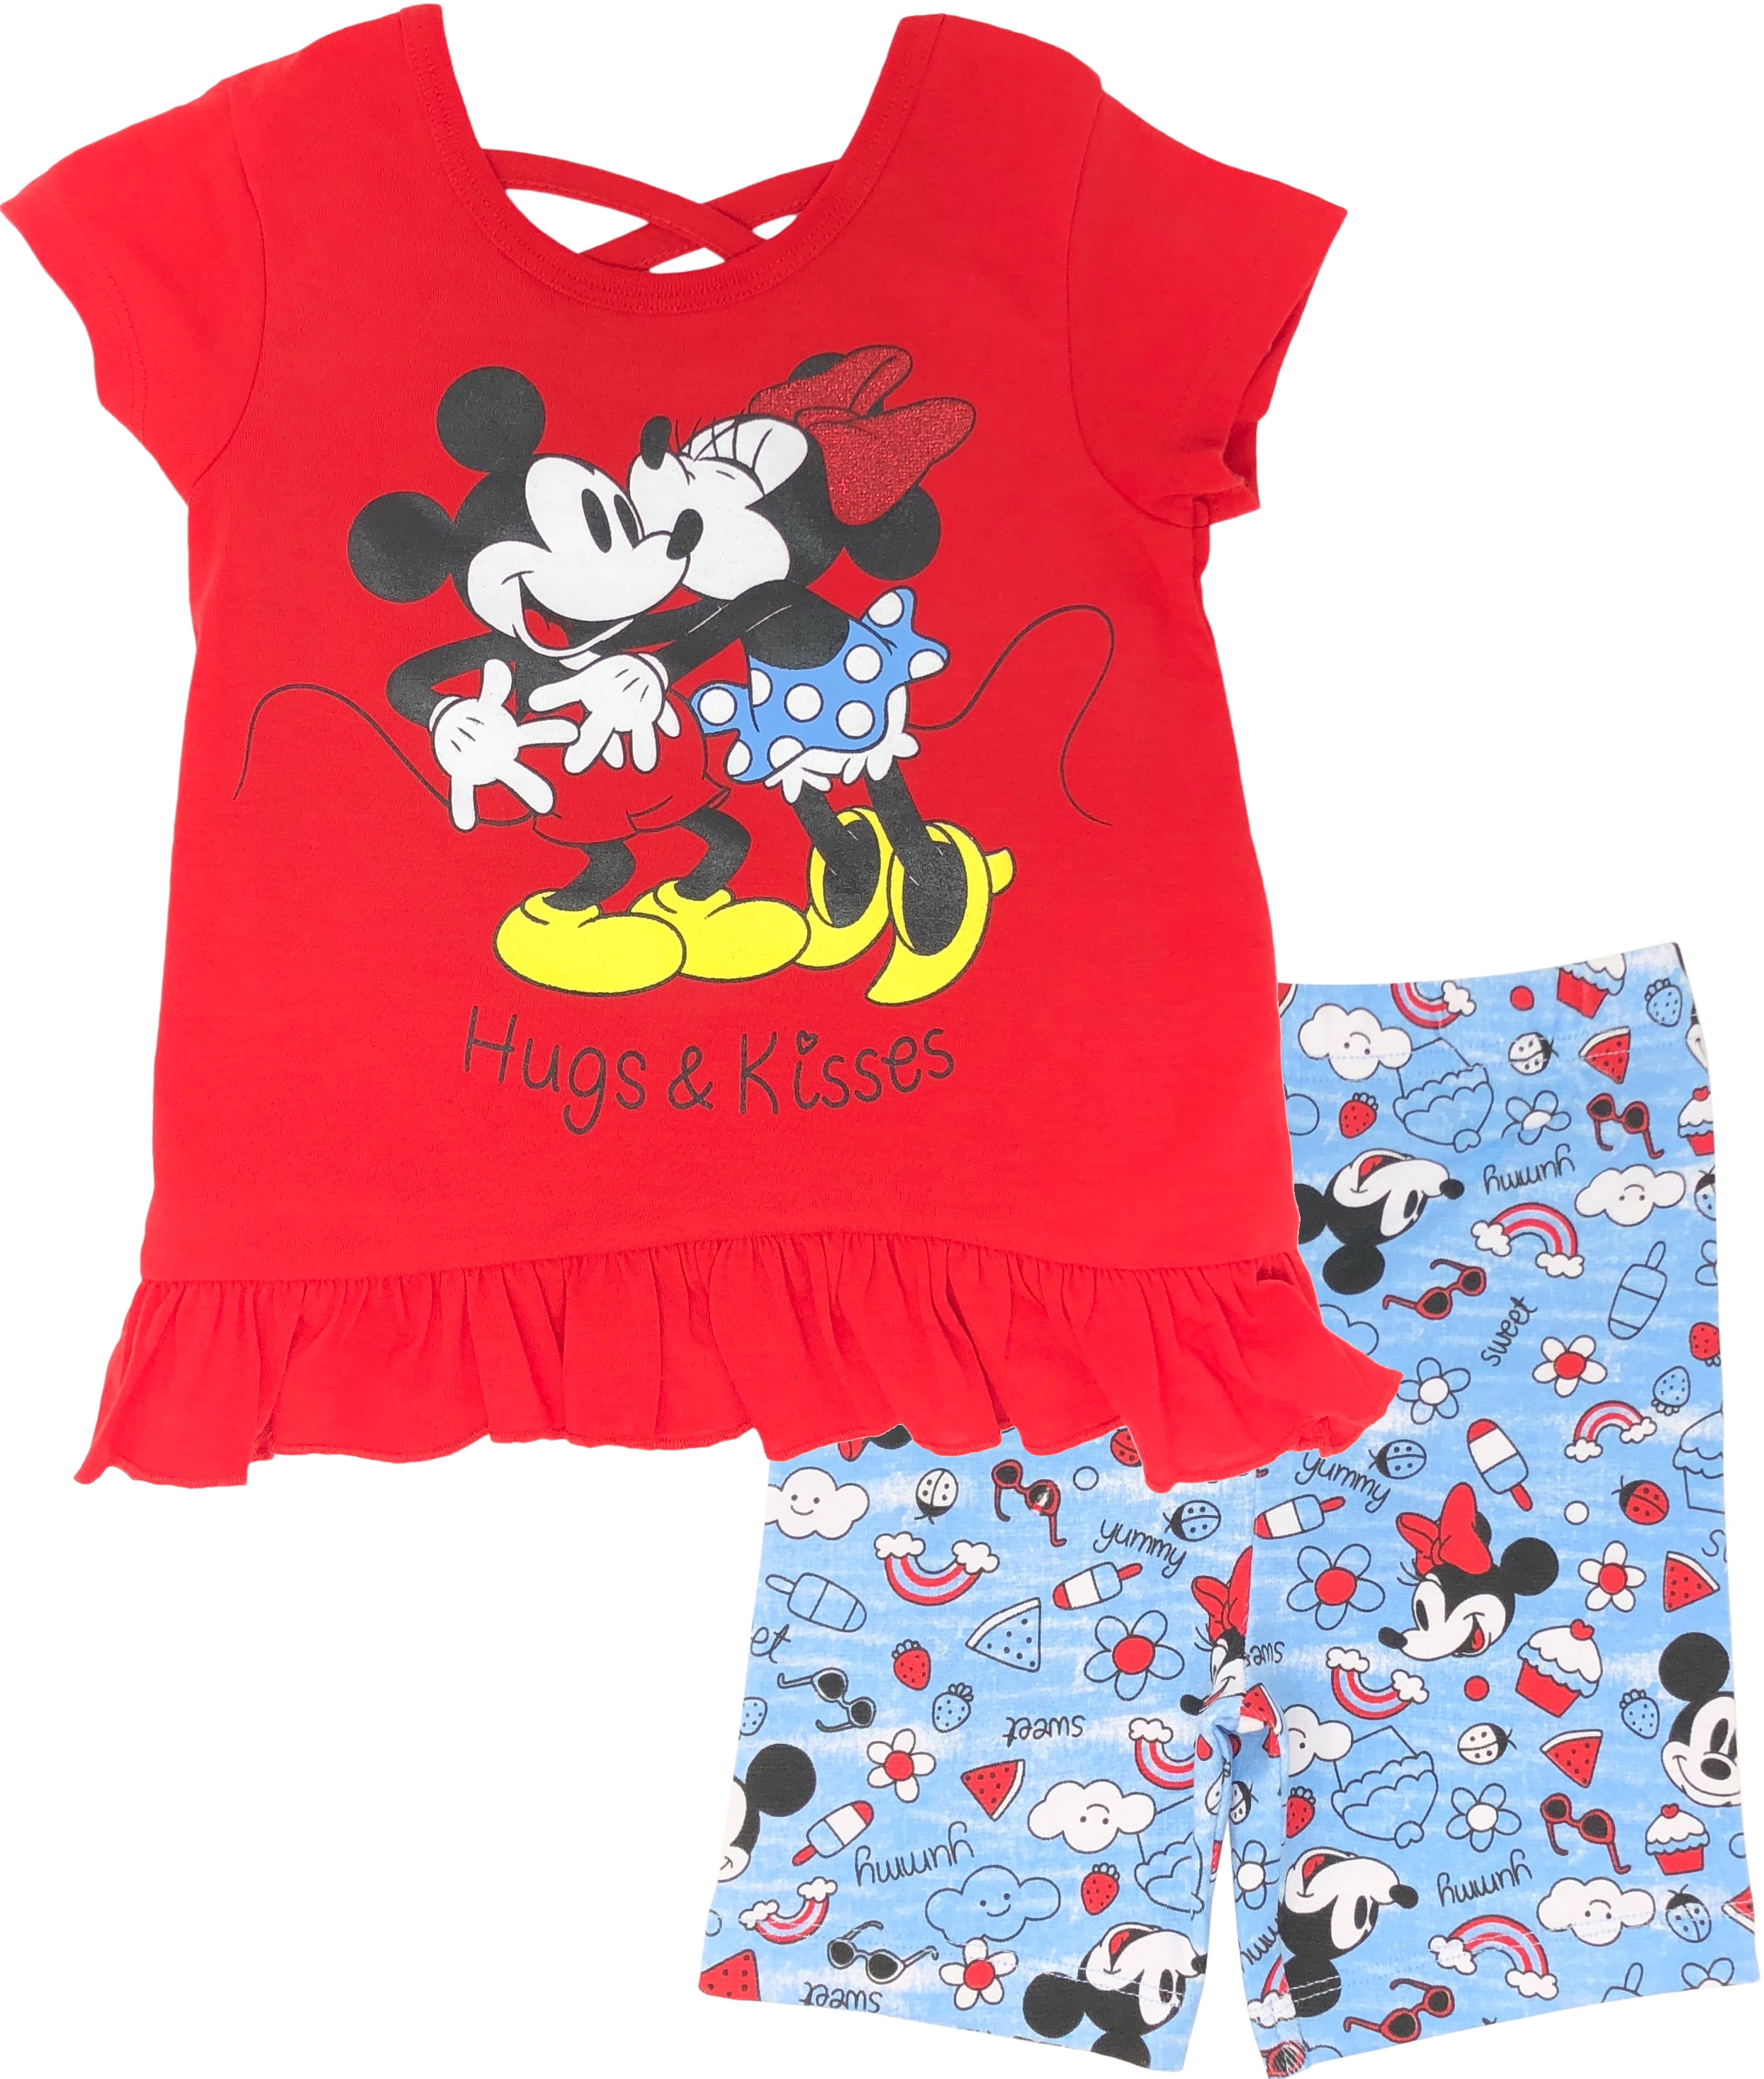 Minnie Mouse Disney Minnie Mouse Baby Infant Girls